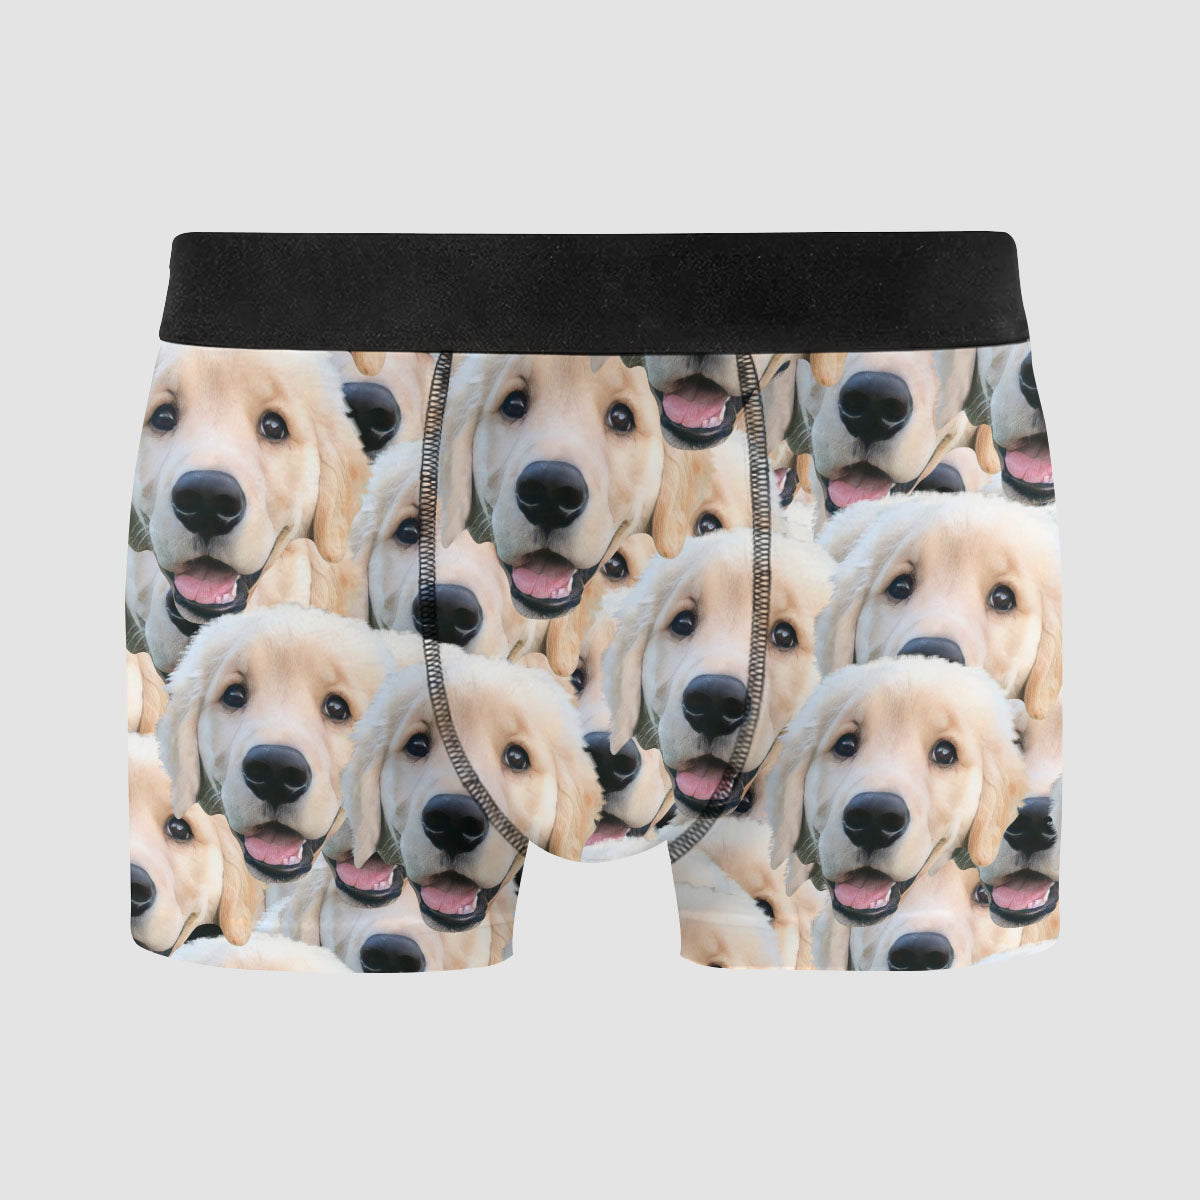 I Love My Dog - Personalized Custom Men's Boxer Briefs - Gift For Dog Lovers, Dog Owners